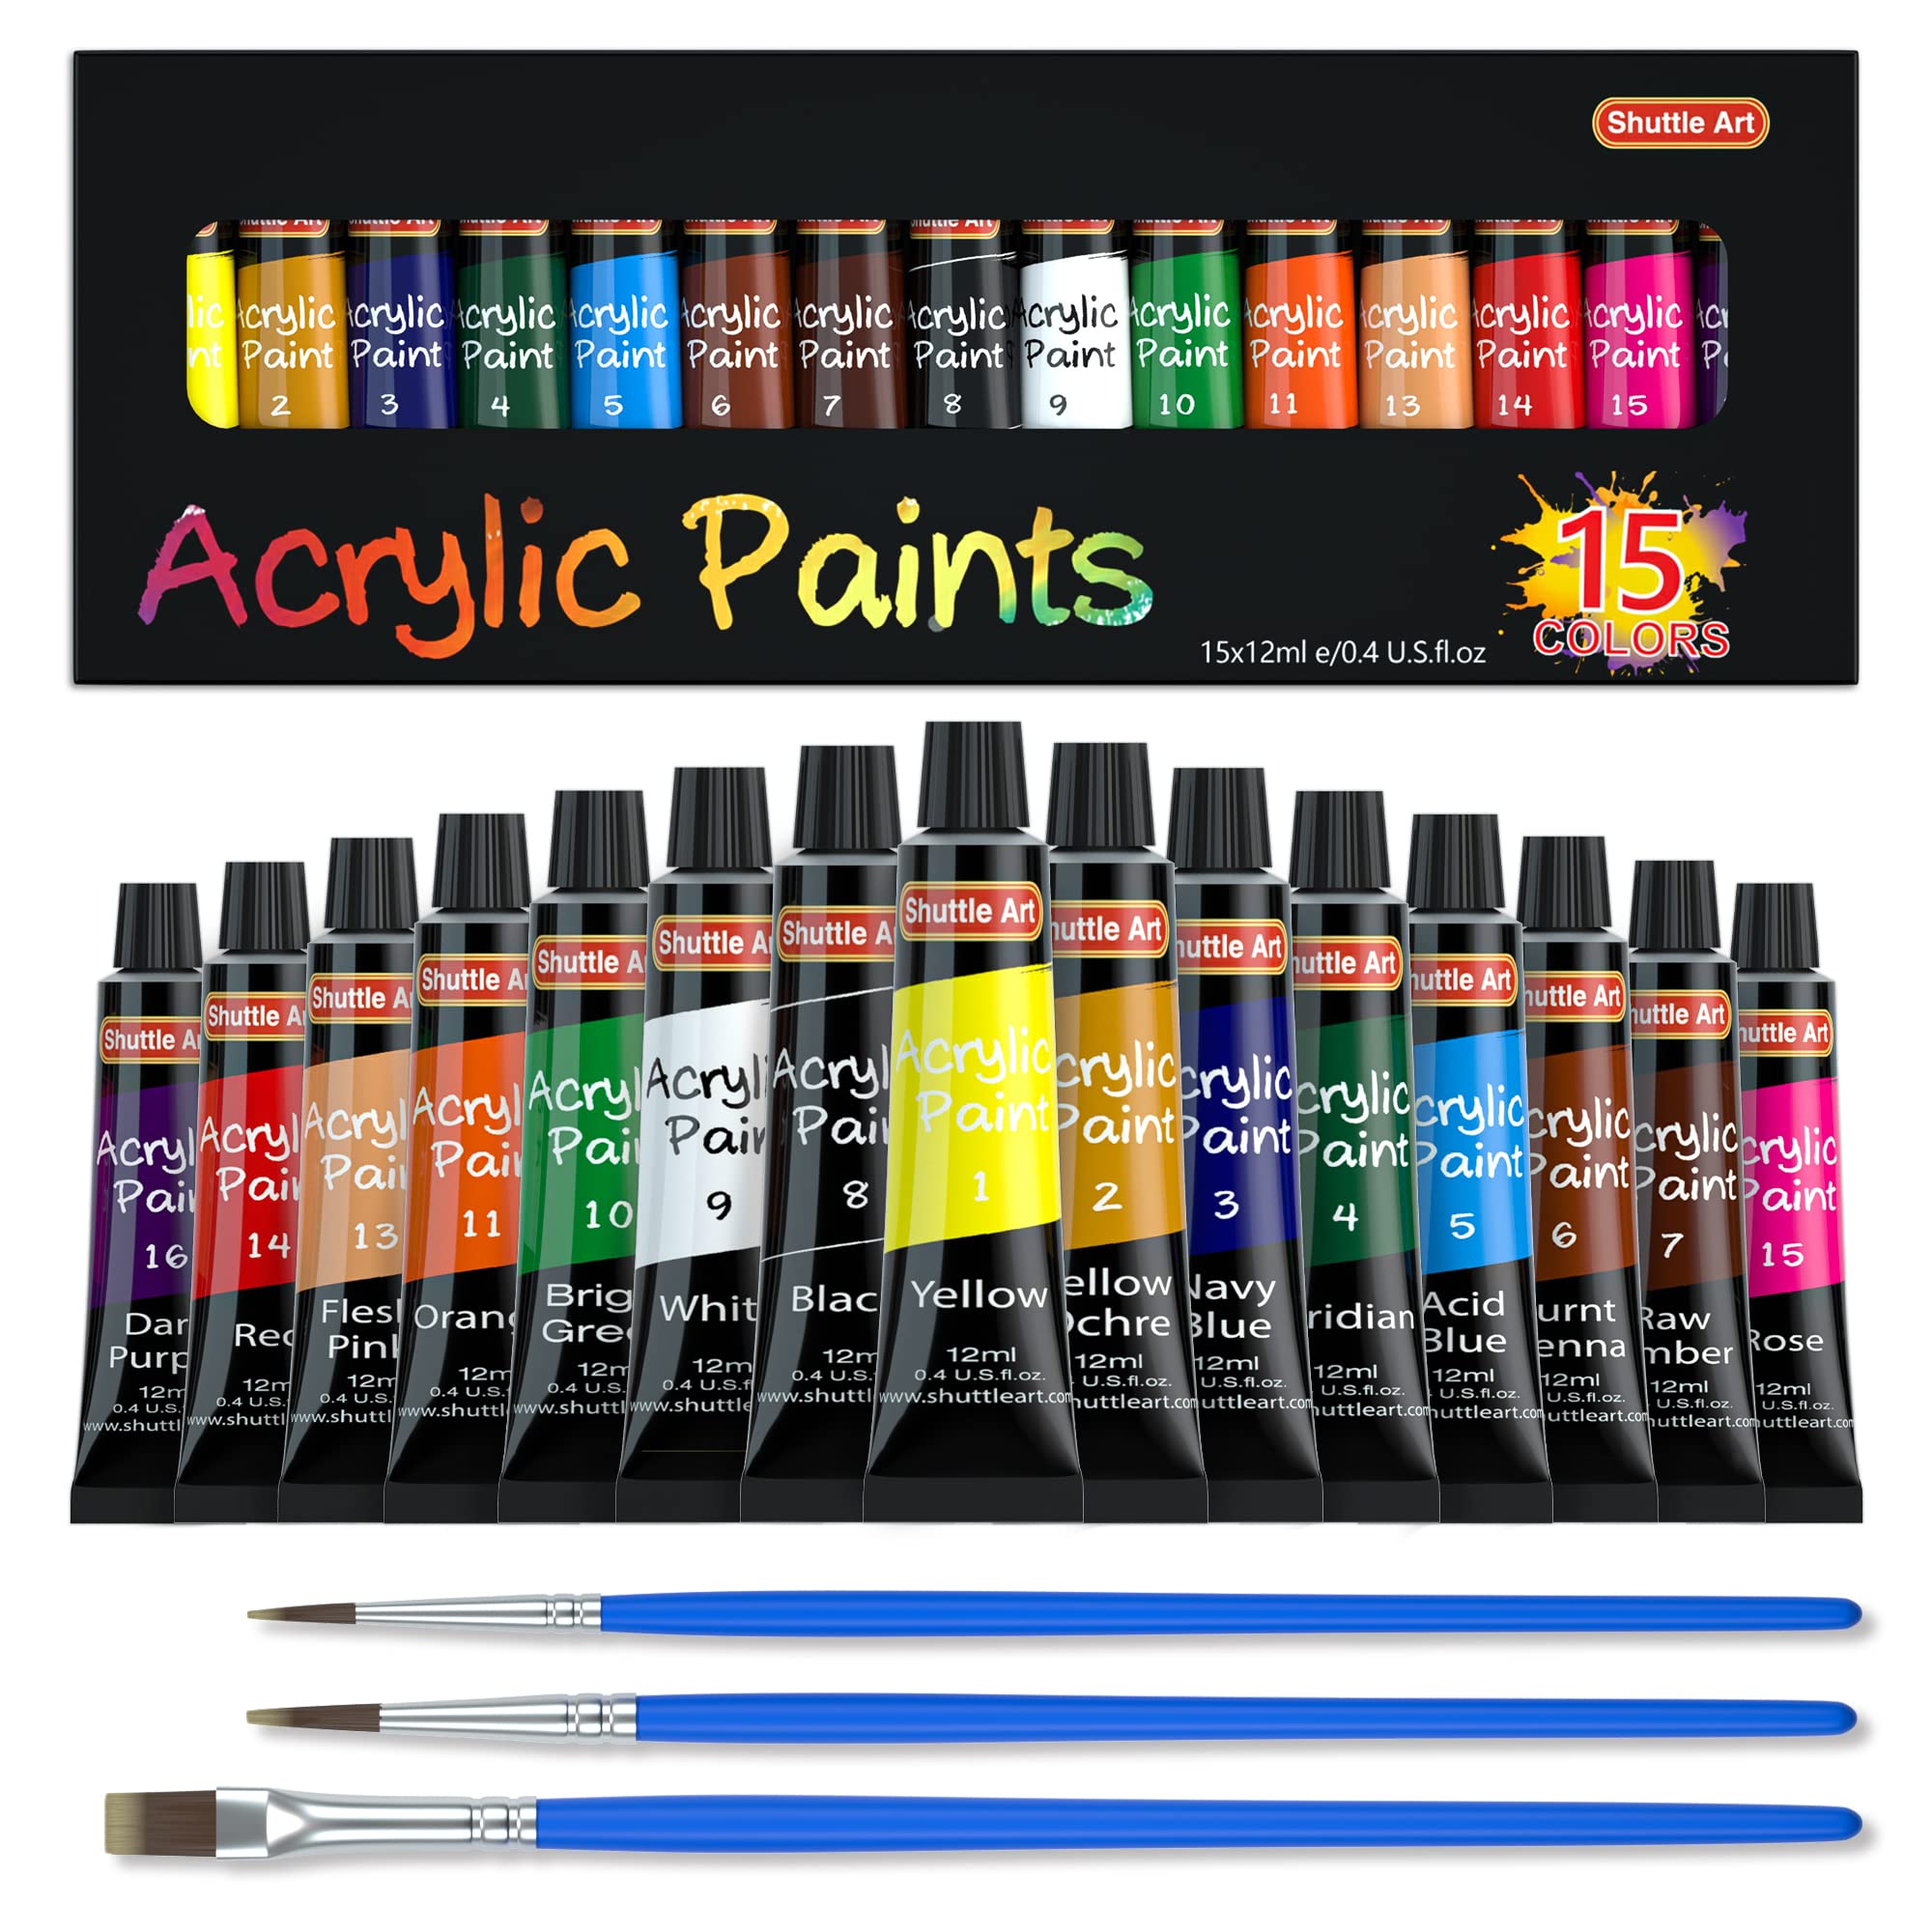 Shuttle Art Acrylic Paint Set, 15 x 12ml Tubes Artist Quality Non Toxic Rich Pigments colors Perfect for Kids Adults Beginners A